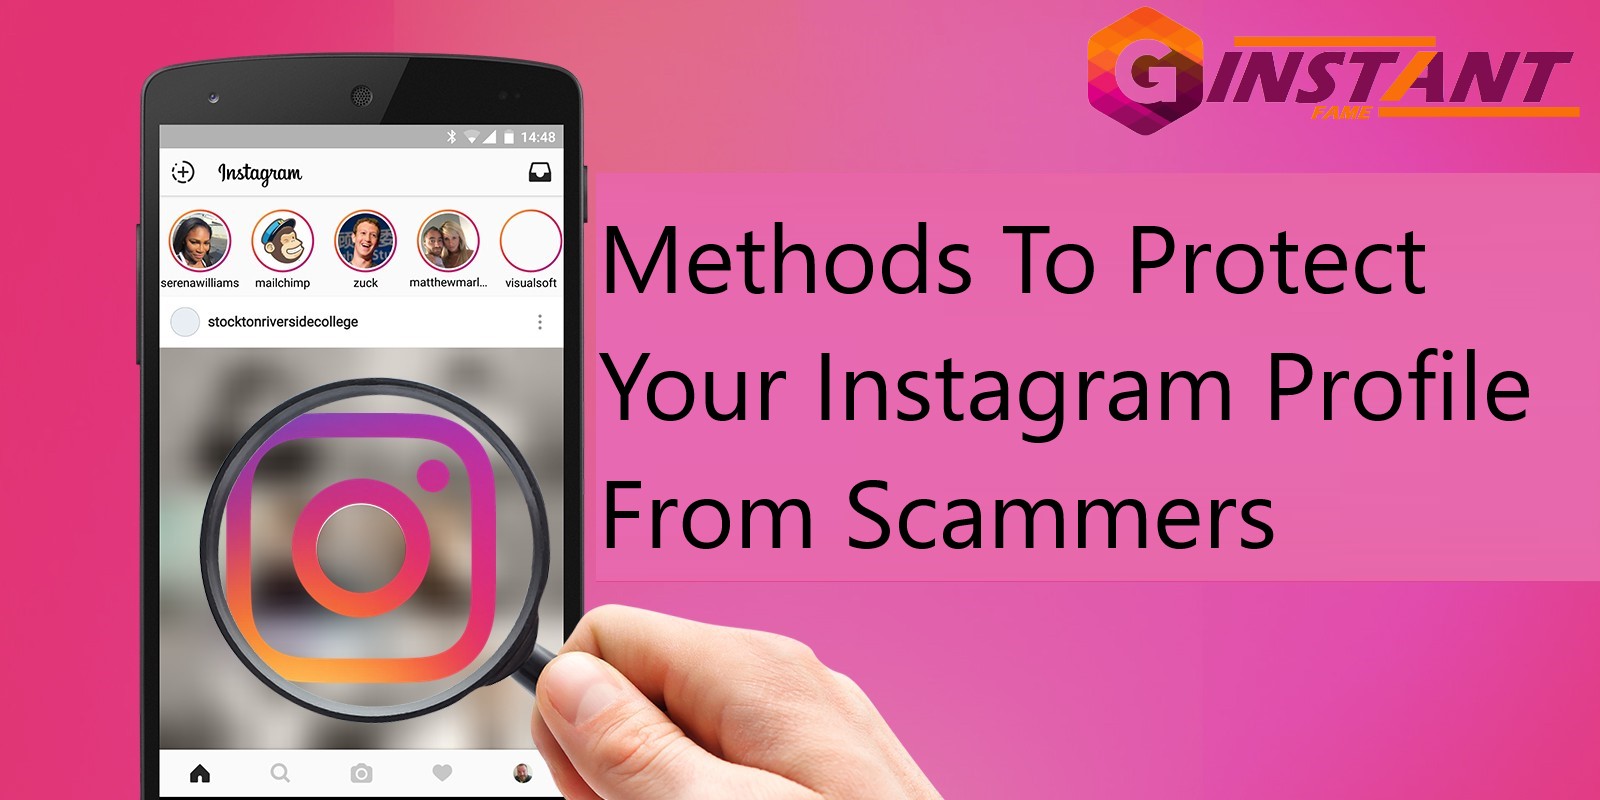 Methods To Protect Your Instagram Profile From Scammers